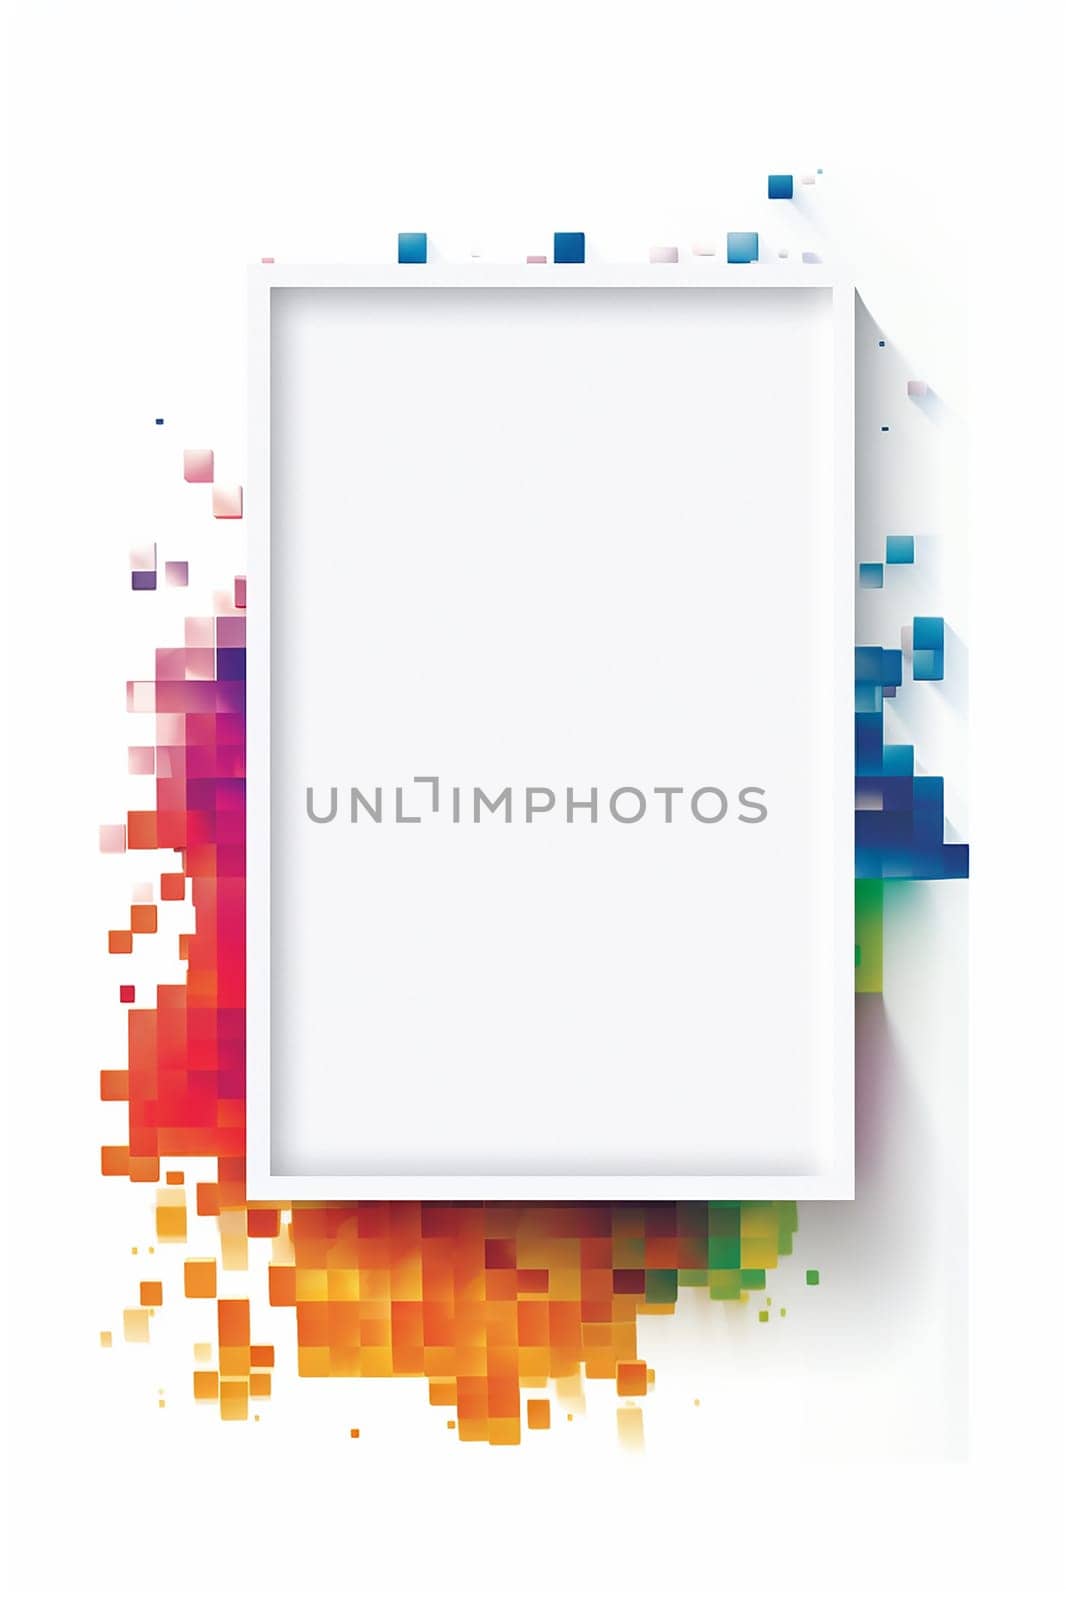 Abstract colorful mock up square frame with pixel dispersion effect by Hype2art